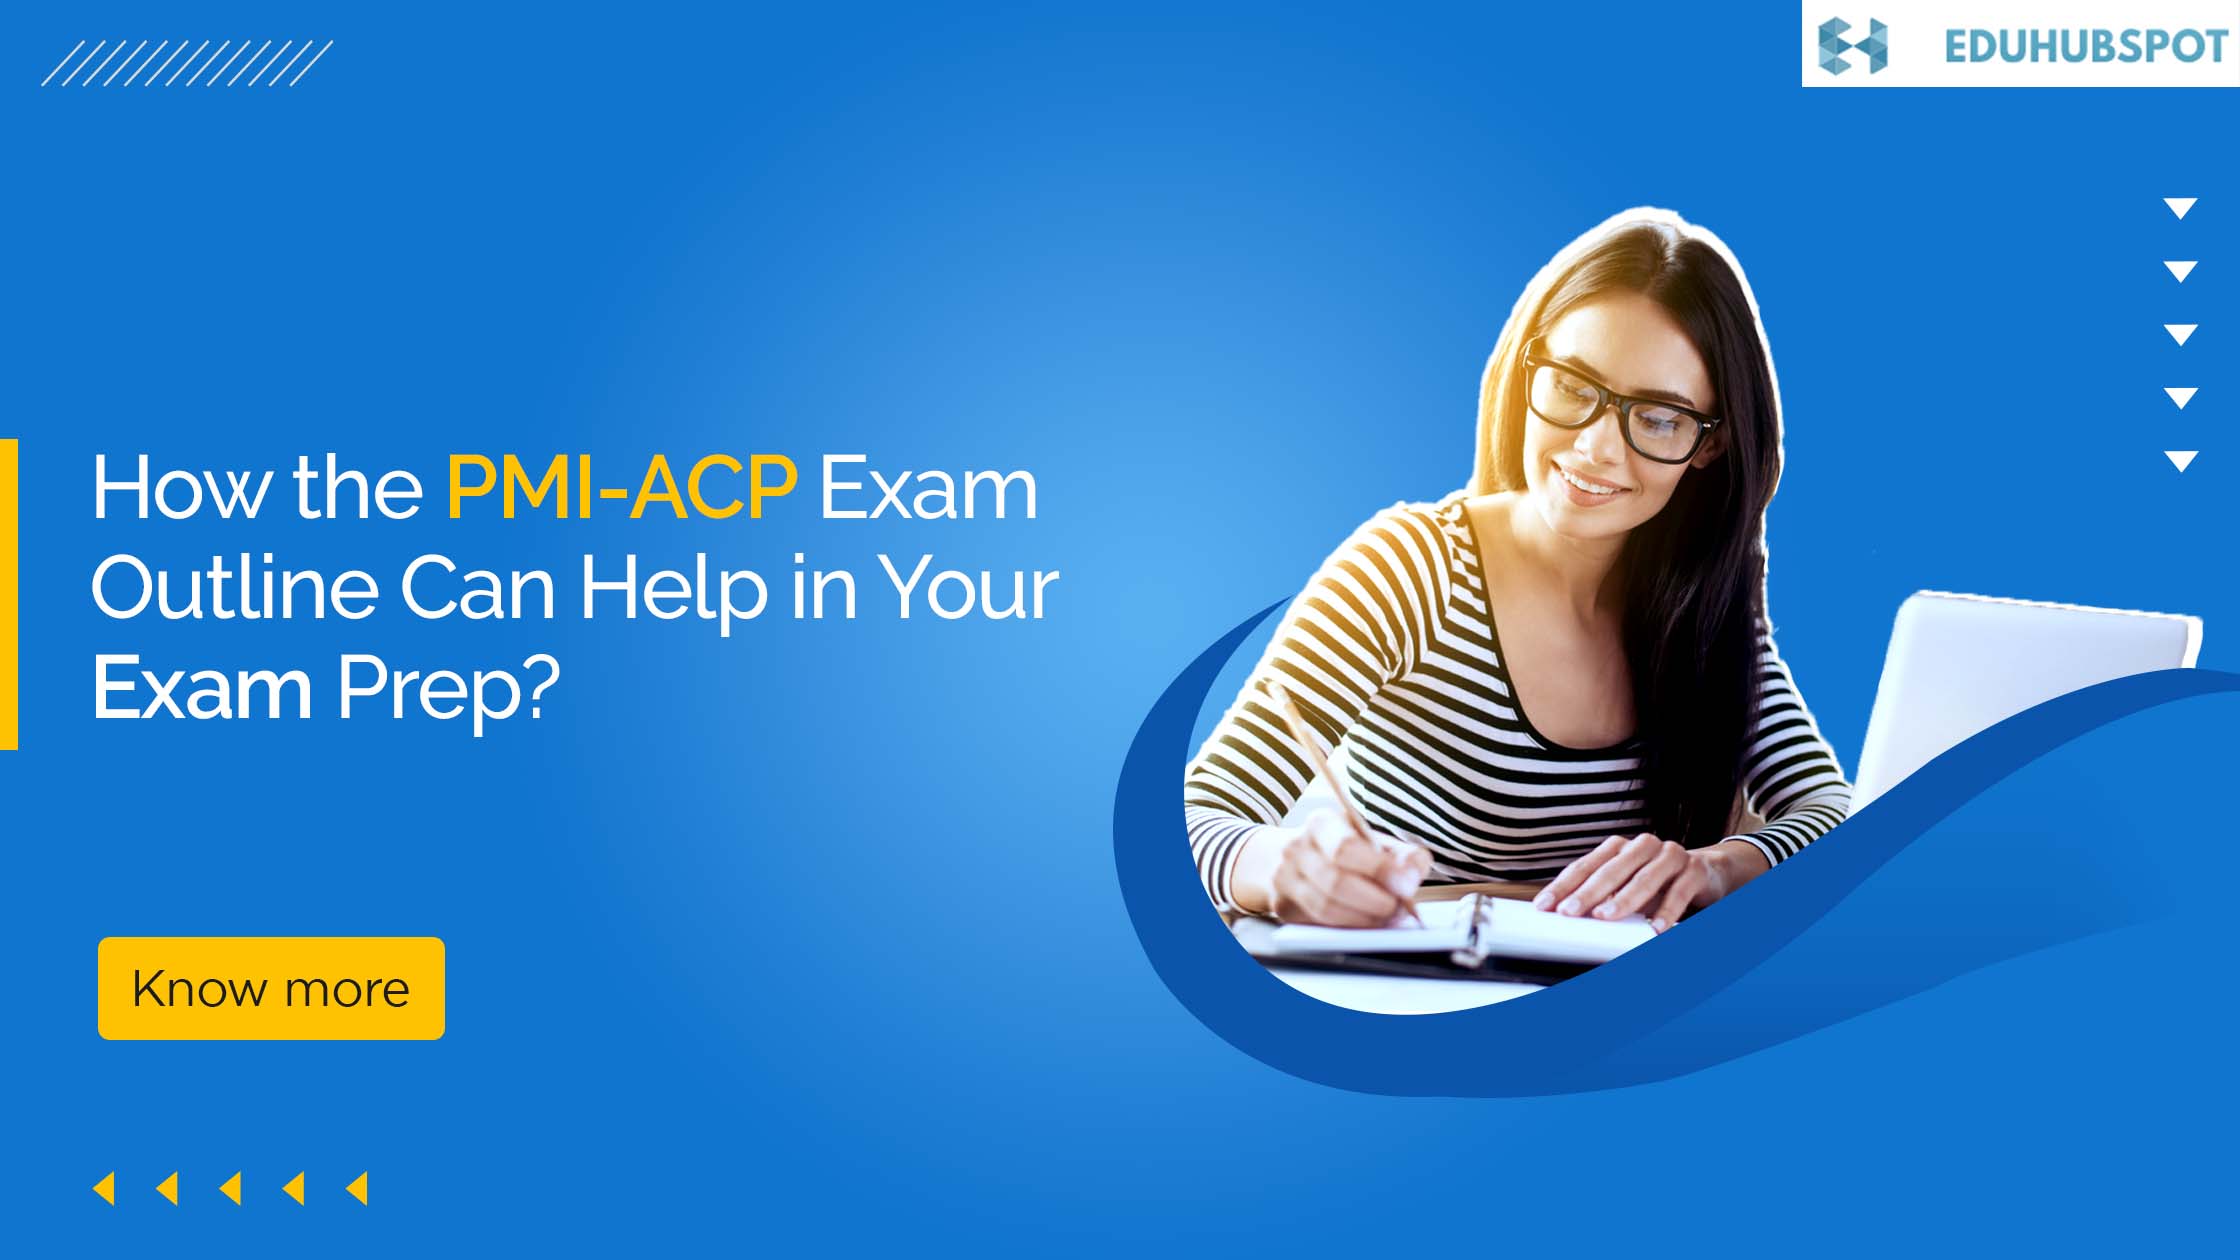 How the PMI-ACP Exam Outline Can Help in Your Exam Prep?